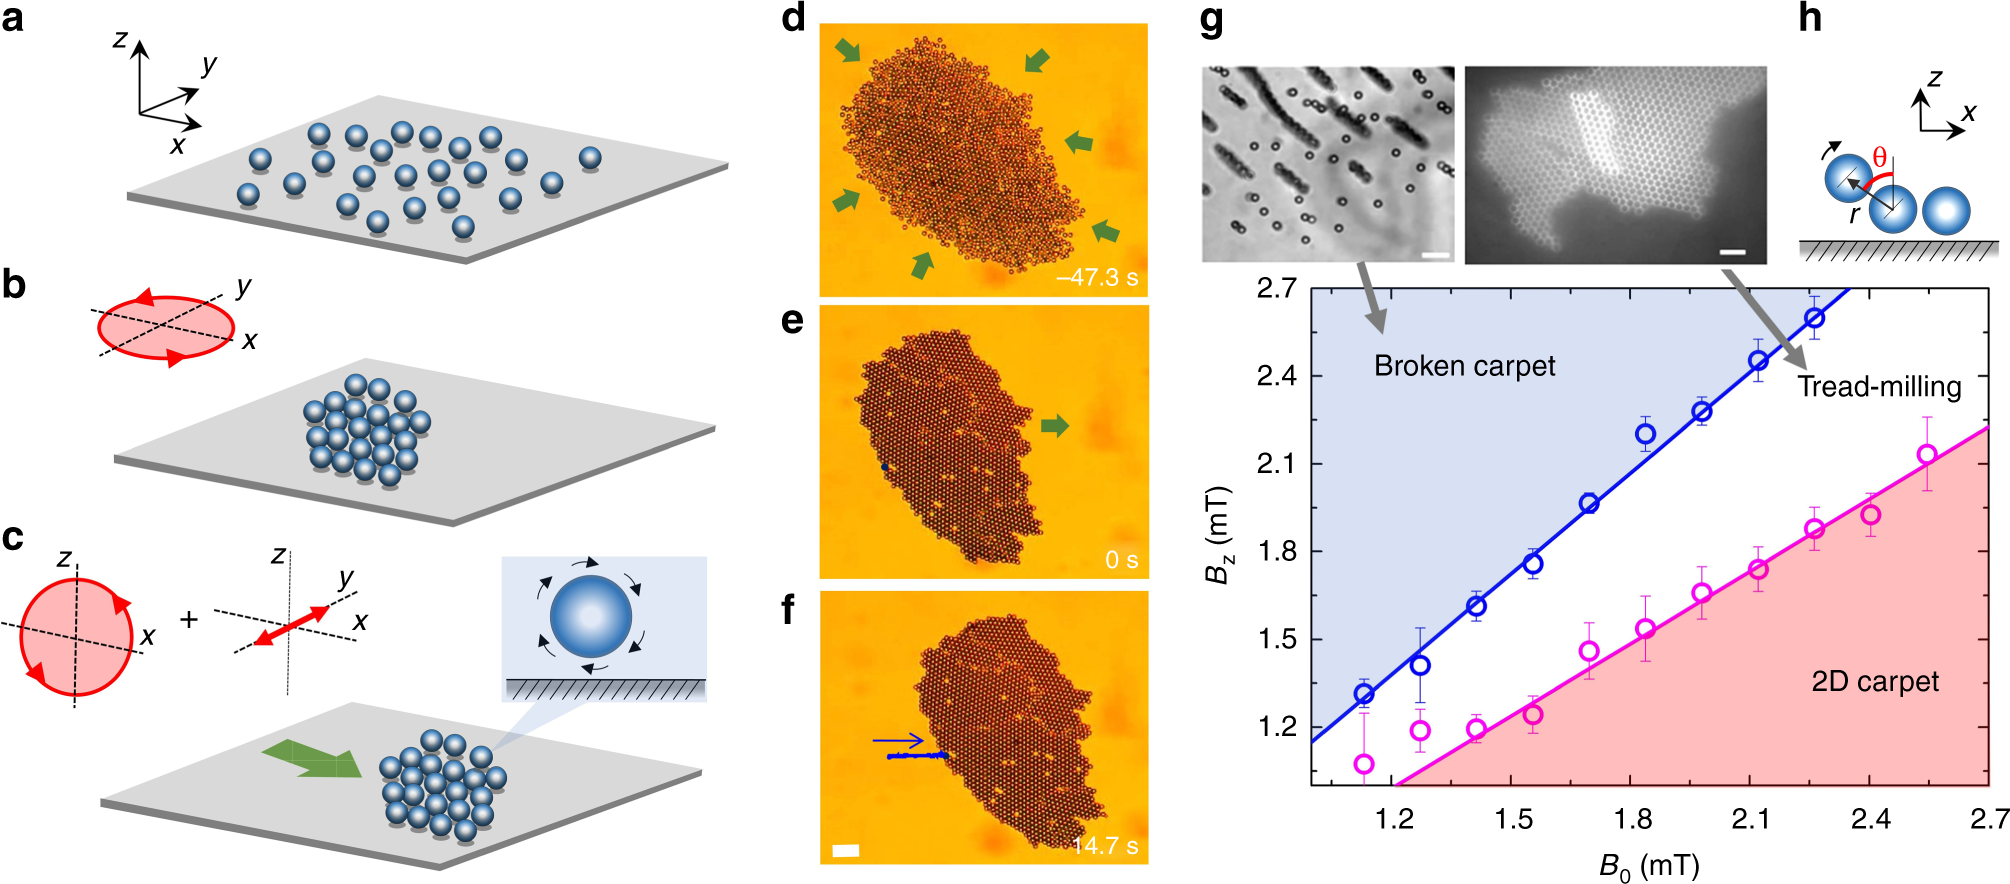 Tunable self-healing of magnetically propelling colloidal carpets